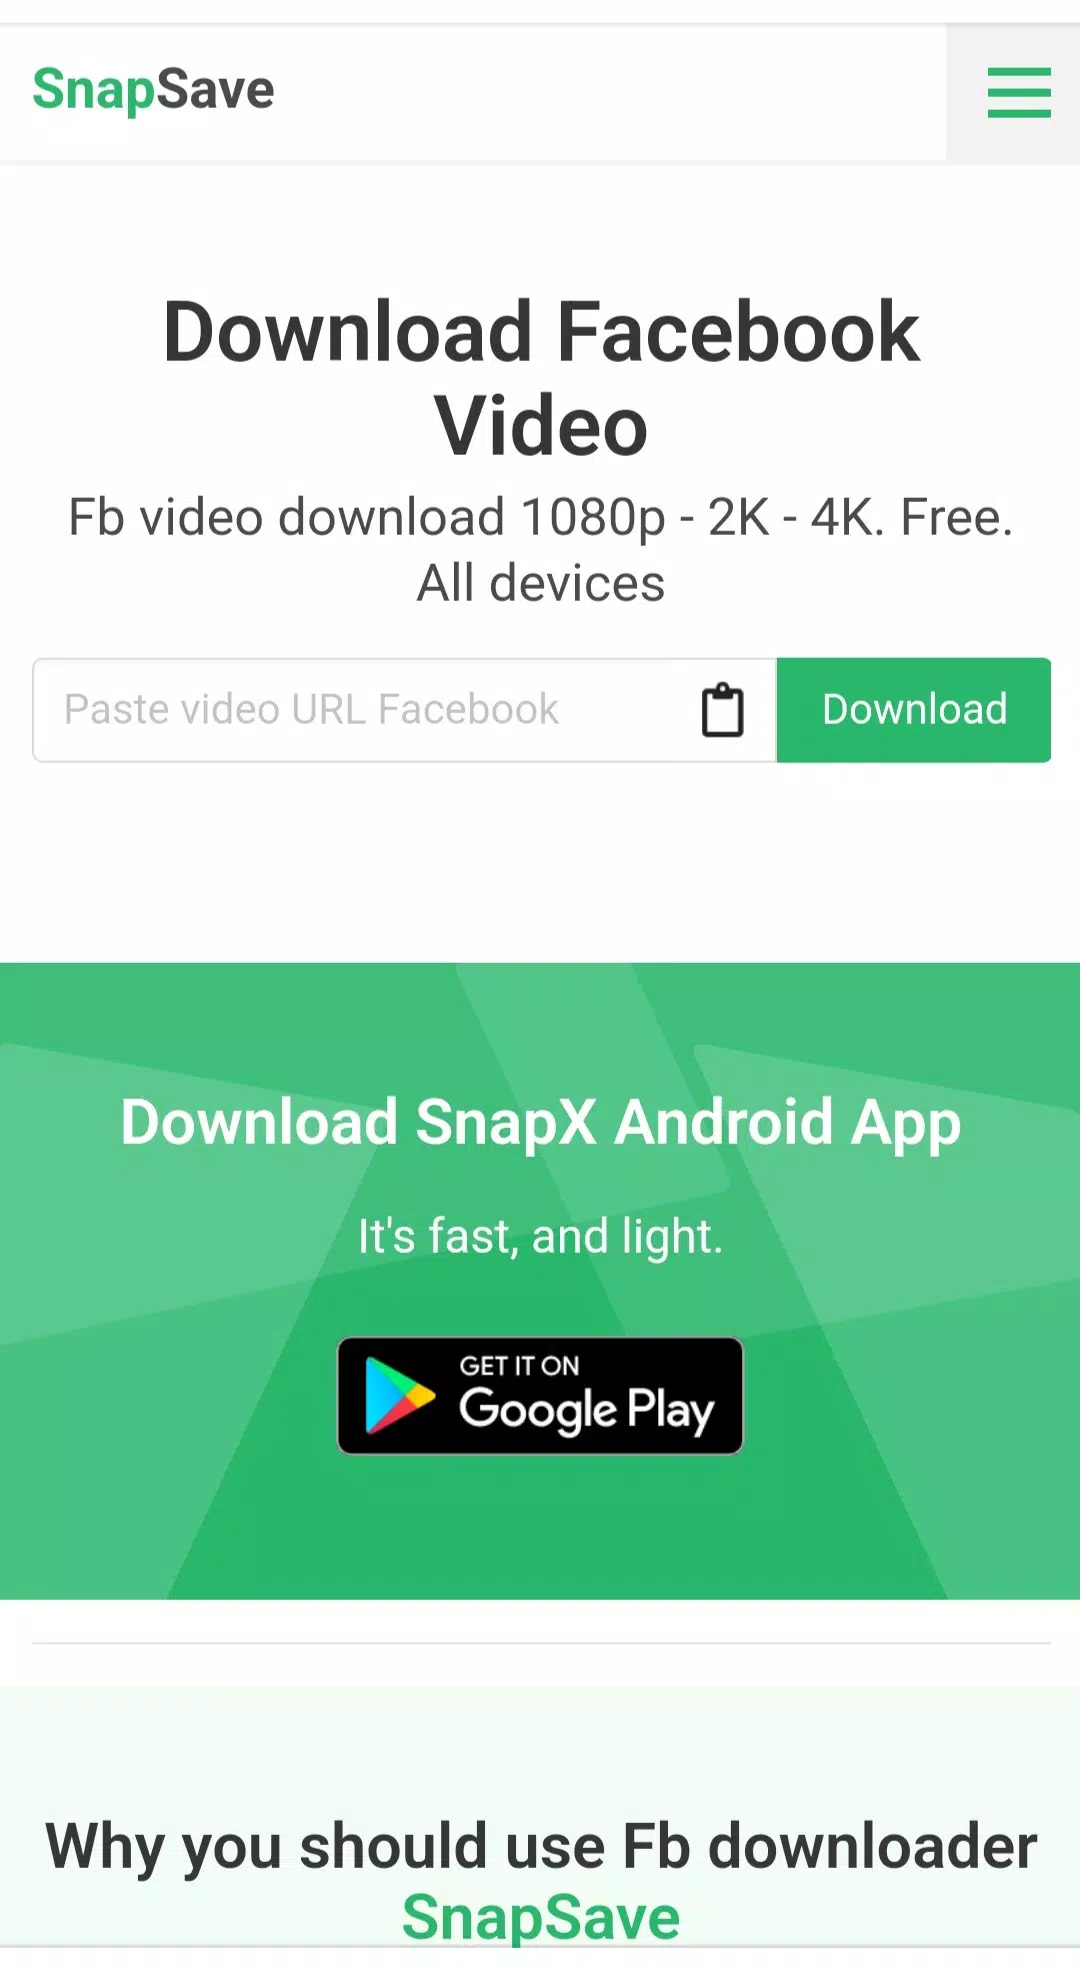 Video downloader for FB - Apps on Google Play